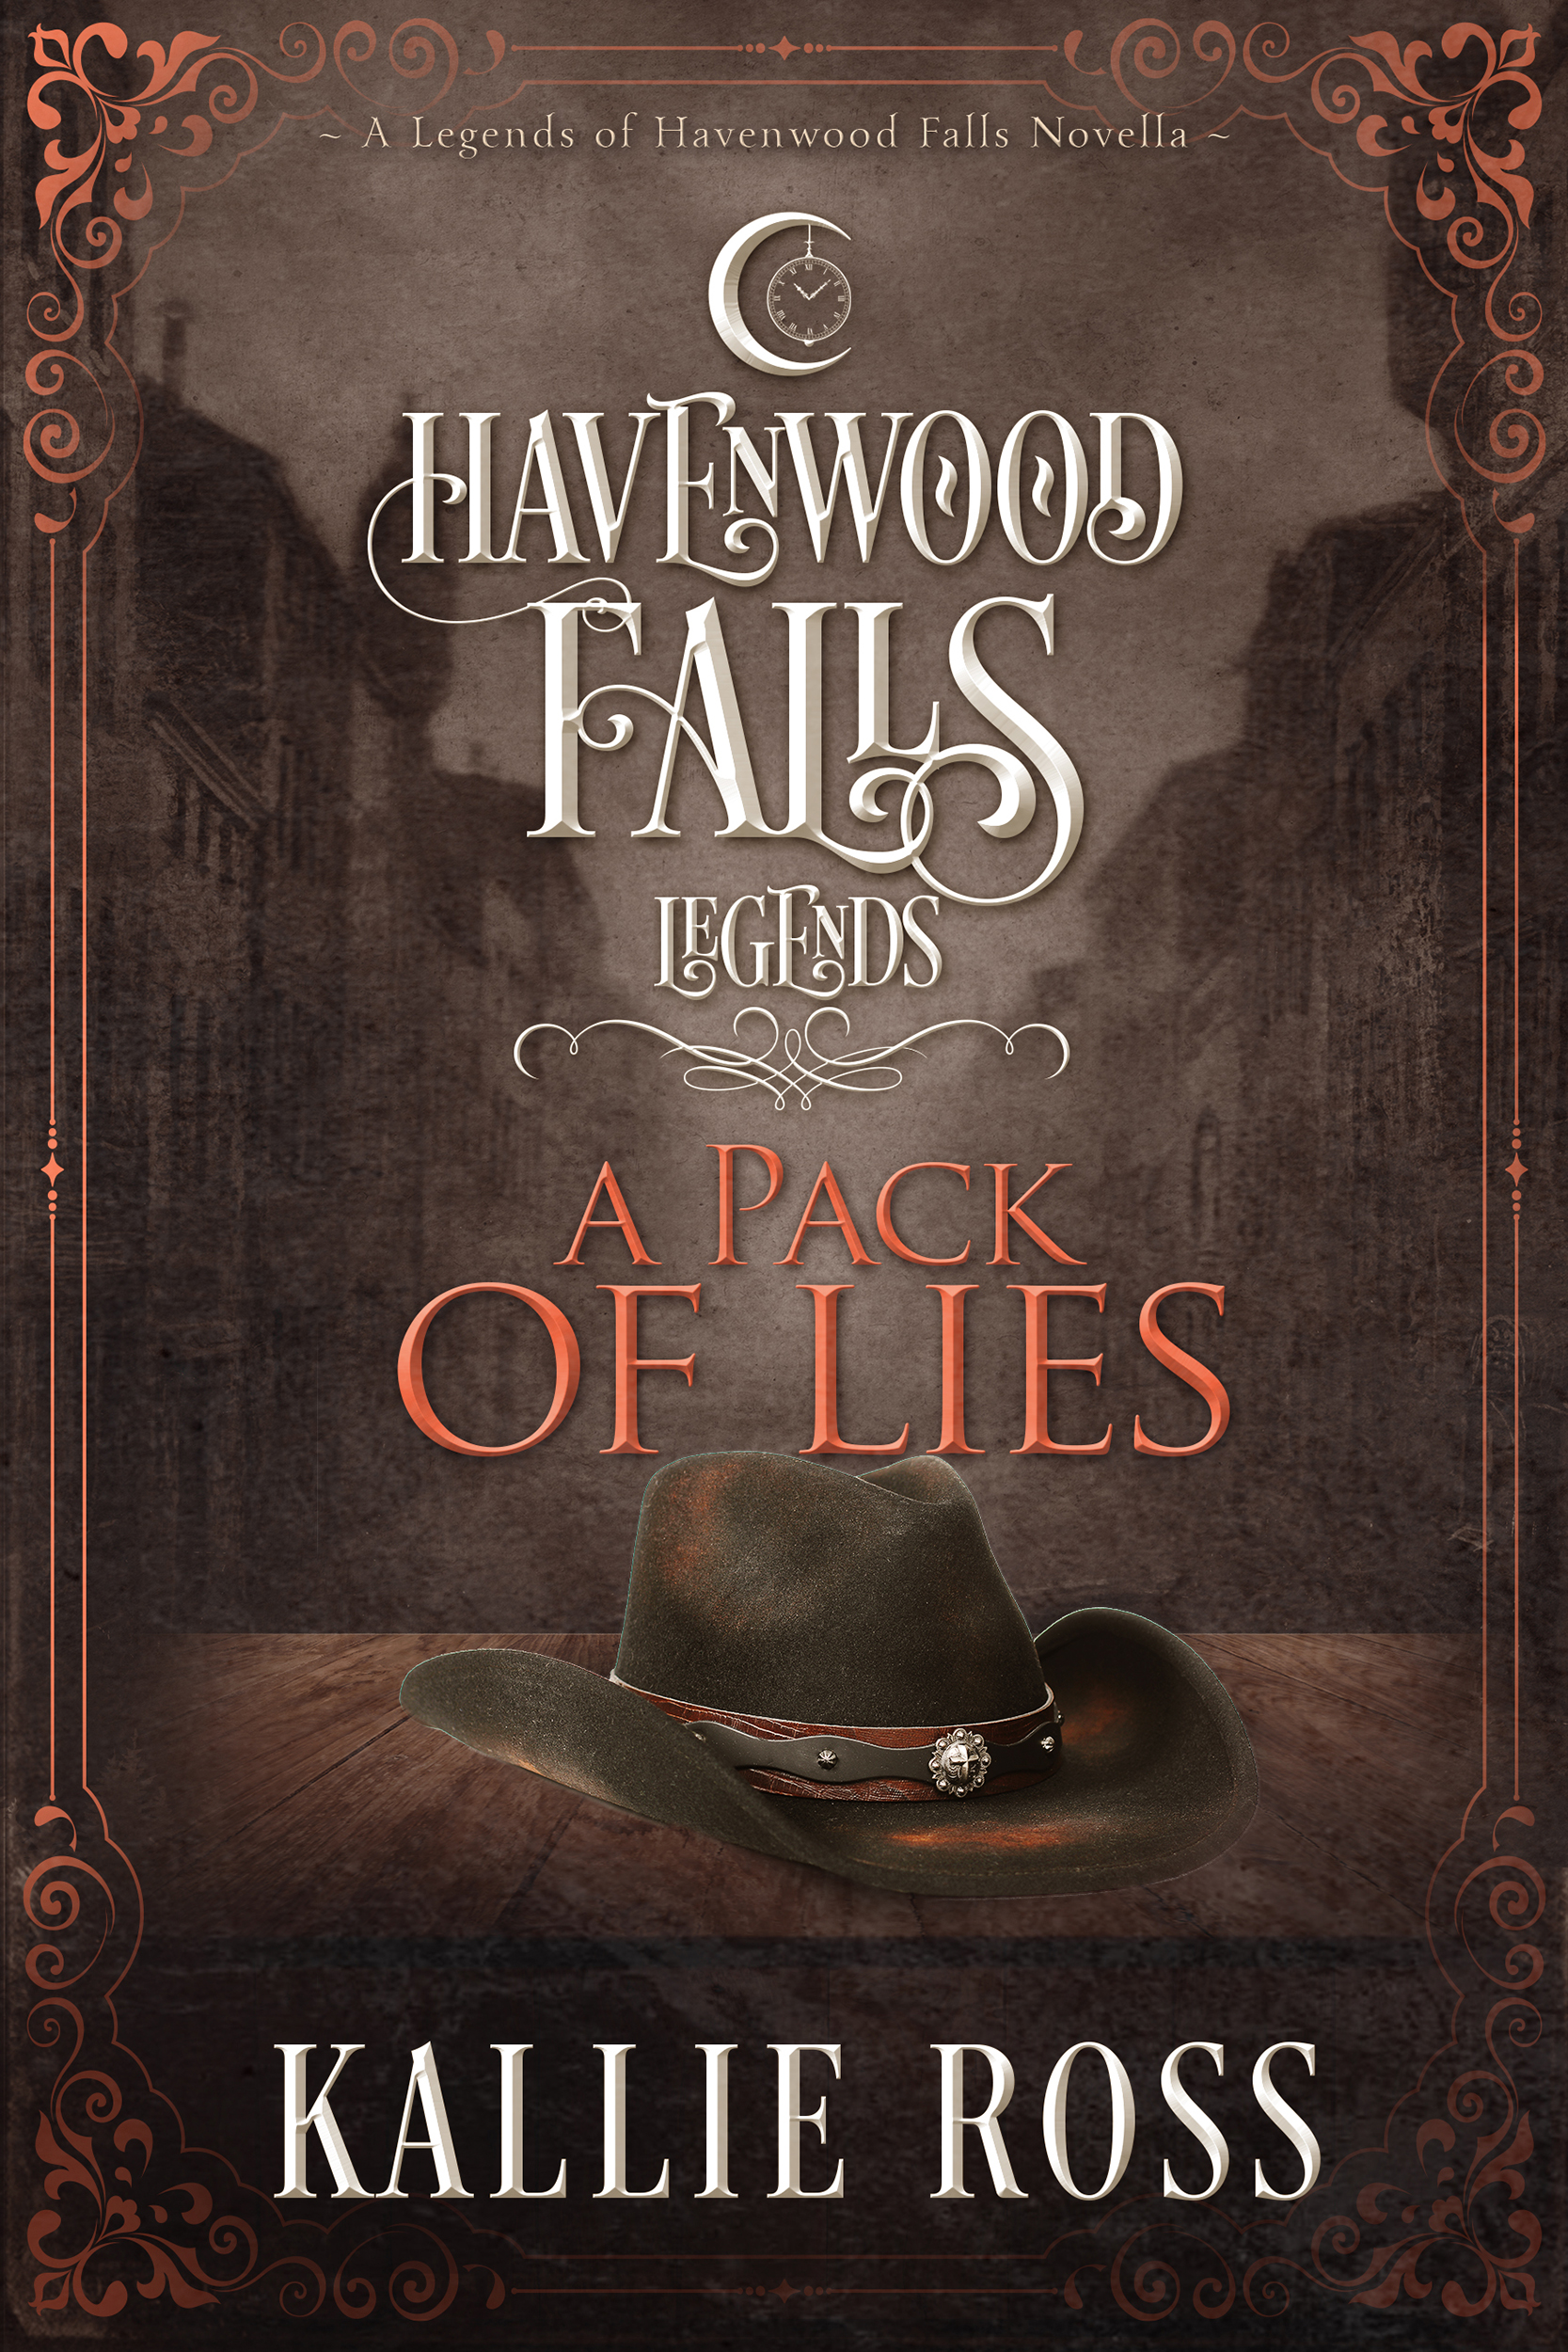 New Release: A Pack of Lies